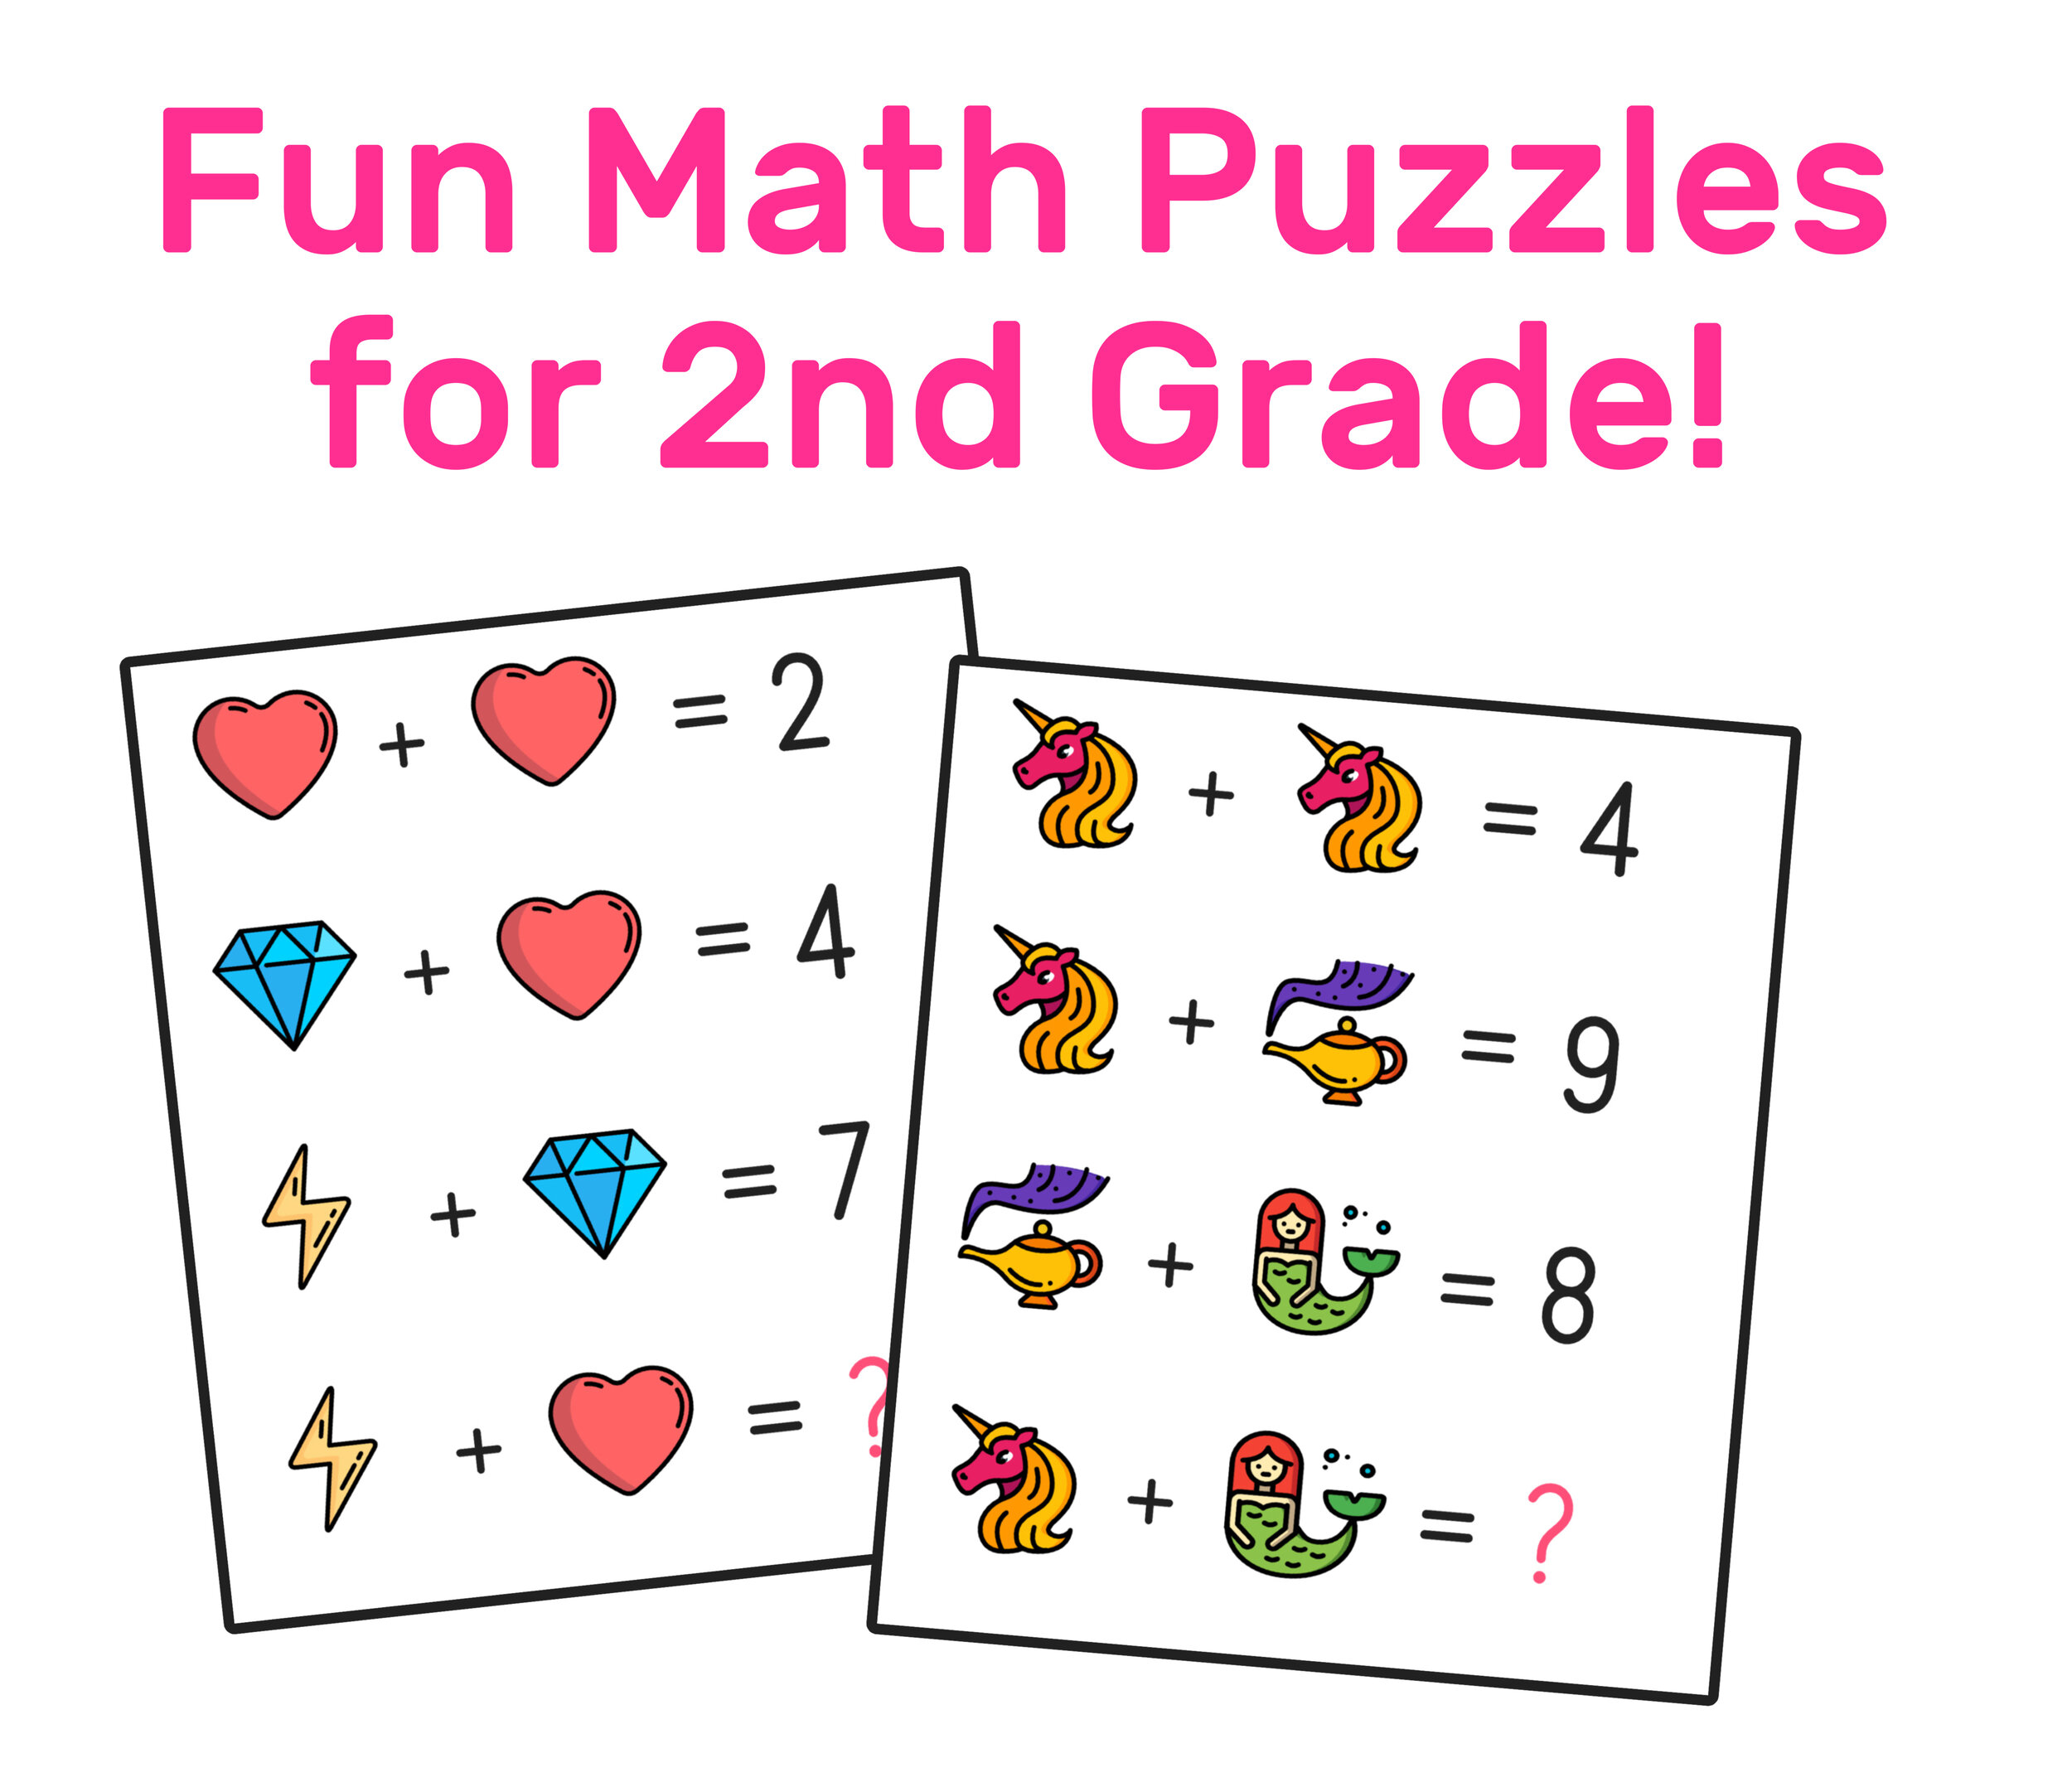 The Best Free 2nd Grade Math Resources Complete List! — Mashup Math